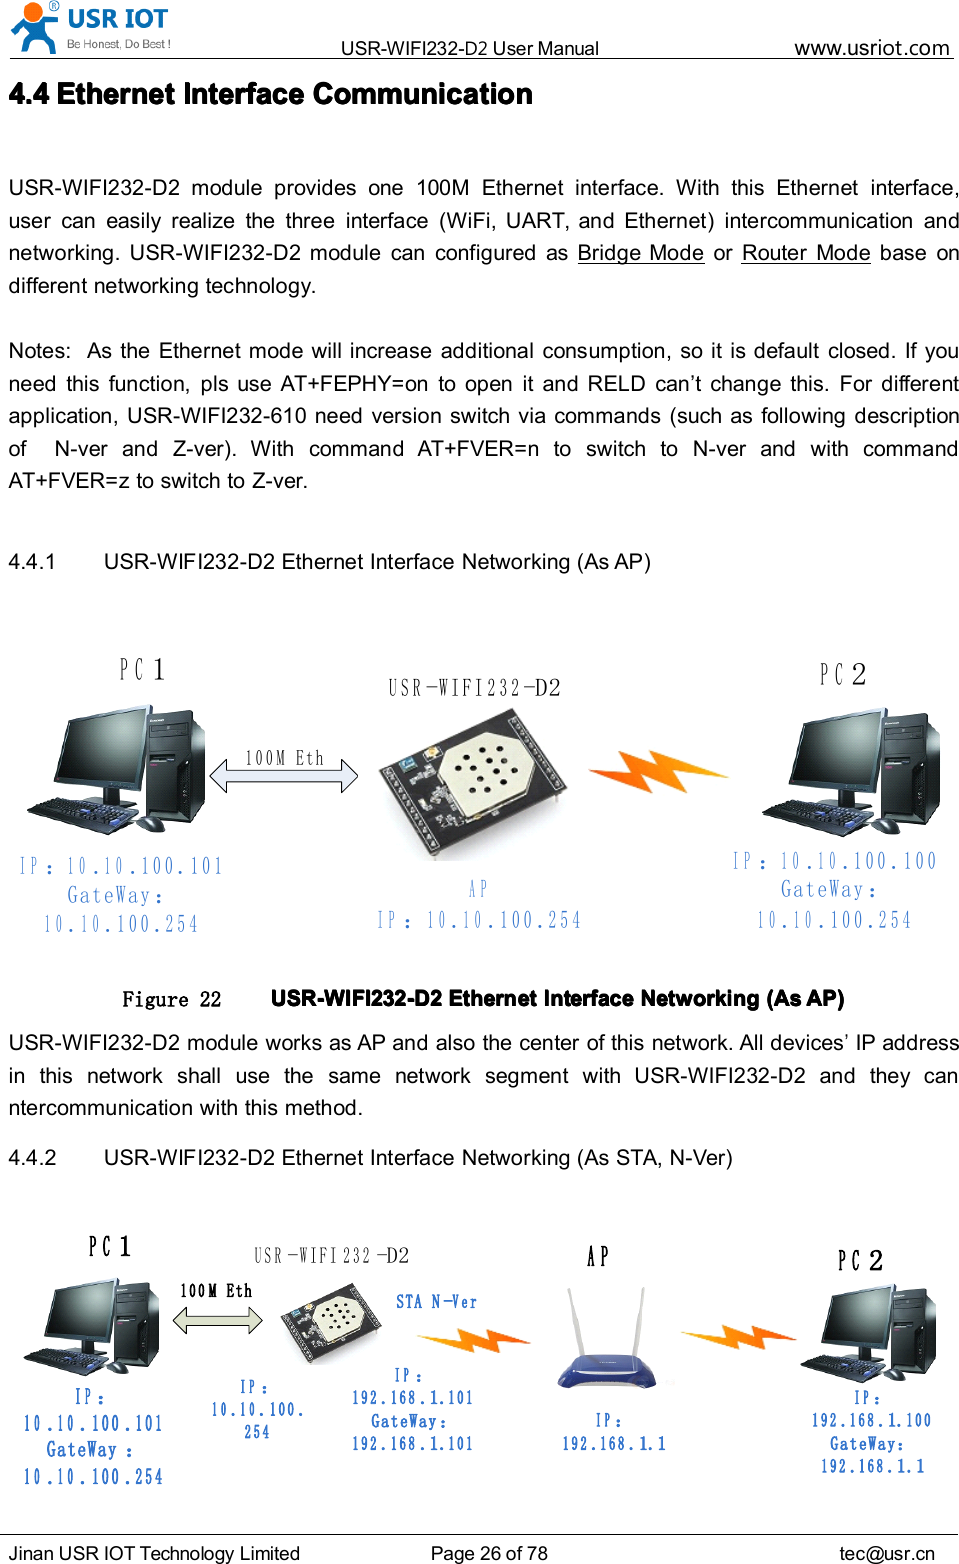 USR-WIFI232- D2 User Manual www.usr iot .comJinan USR IOT Technology Limited Page 26 of 78 tec@usr.cn4.44.44.44.4 EthernetEthernetEthernetEthernet InterfaceInterfaceInterfaceInterface CommunicationCommunicationCommunicationCommunicationUSR-WIFI232-D2 module provides one 100M Ethernet interface. With this Ethernet interface,user can easily realize the three interface (WiFi, UART, and Ethernet) intercommunication andnetworking. USR-WIFI232-D2 module can configured as Bridge Mode or Router Mode base ondifferent networking technology.Notes: As the Ethernet mode will increase additional consumption, so it is default closed. If youneed this function, pls use AT+FEPHY=on to open it and RELD can ’ t change this. F or differentapplication, USR-WIFI232-610 need version switch via commands (such as following descriptionof N-ver and Z-ver). With command AT+FVER=n to switch to N-ver and with commandAT+FVER=z to switch to Z-ver.4.4.1 USR-WIFI232-D2 Ethernet Interface Networking (As AP)PC1PC2USR-WIFI232- D 2IP：10.10.100.101GateWay：10.10.100.254APIP：10.10.100.254IP：10.10.100.100GateWay：10.10.100.254100M EthFigure 22 USR-WIFI232-D2USR-WIFI232-D2USR-WIFI232-D2USR-WIFI232-D2 EthernetEthernetEthernetEthernet InterfaceInterfaceInterfaceInterface NetworkingNetworkingNetworkingNetworking (As(As(As(As AP)AP)AP)AP)USR-WIFI232-D2 module works as AP and also the cent er of this network. All devices’IP addressin this network shall use the same network segment with USR-WIFI232-D2 and they canntercommunication with this method.4.4.2 USR-WIFI232-D2 Ethernet Interface Networking (As STA, N-Ver)PC1USR-WIFI232- D 2APPC2IP：10.10.100.101GateWay：10.10.100.254IP：10.10.100.254IP：192.168. 1 .101GateWay：192.168. 1 .101IP：192.168. 1 . 1IP：192.168.1.100GateWay：192.168. 1 . 1100M EthSTA N-Ver